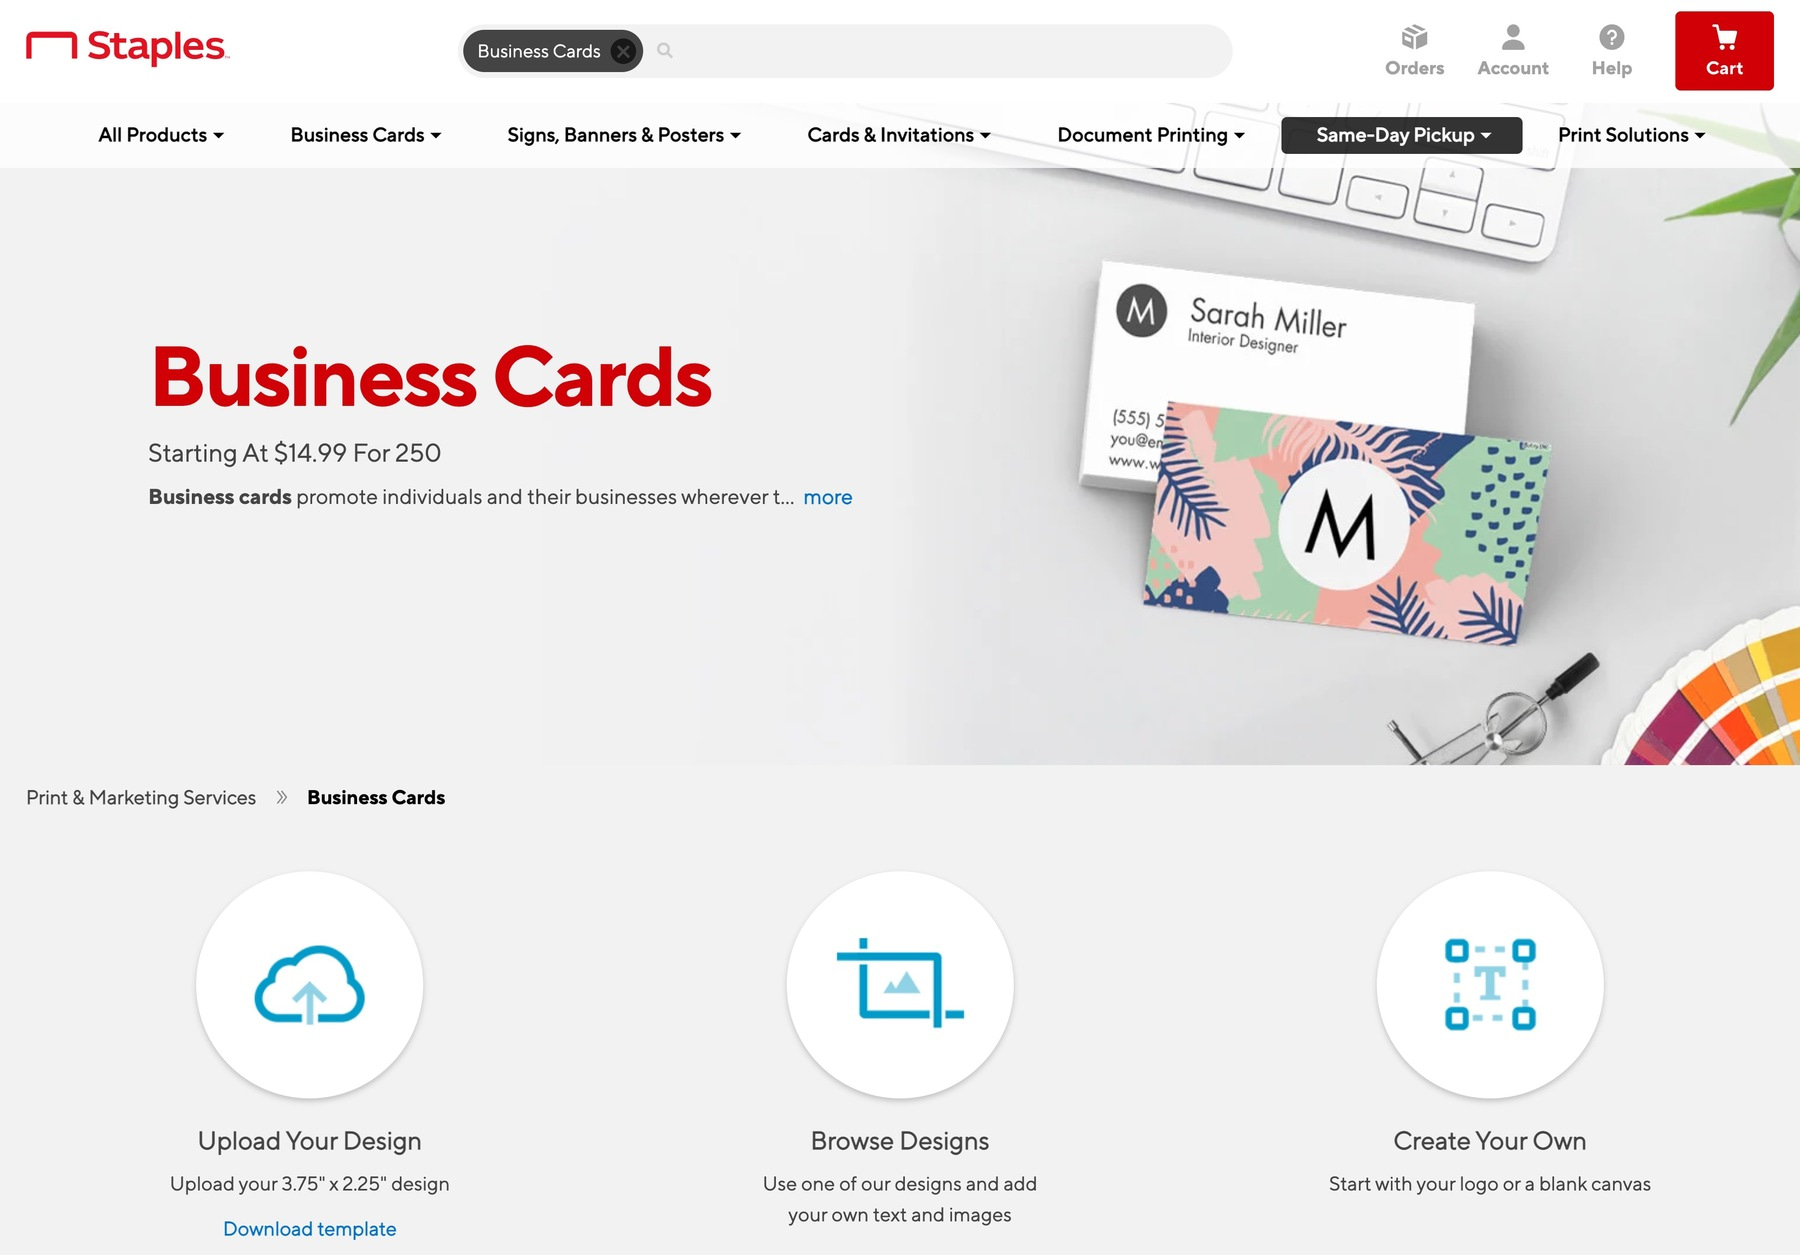 Staples is one of the best business card printing services for cheap prices